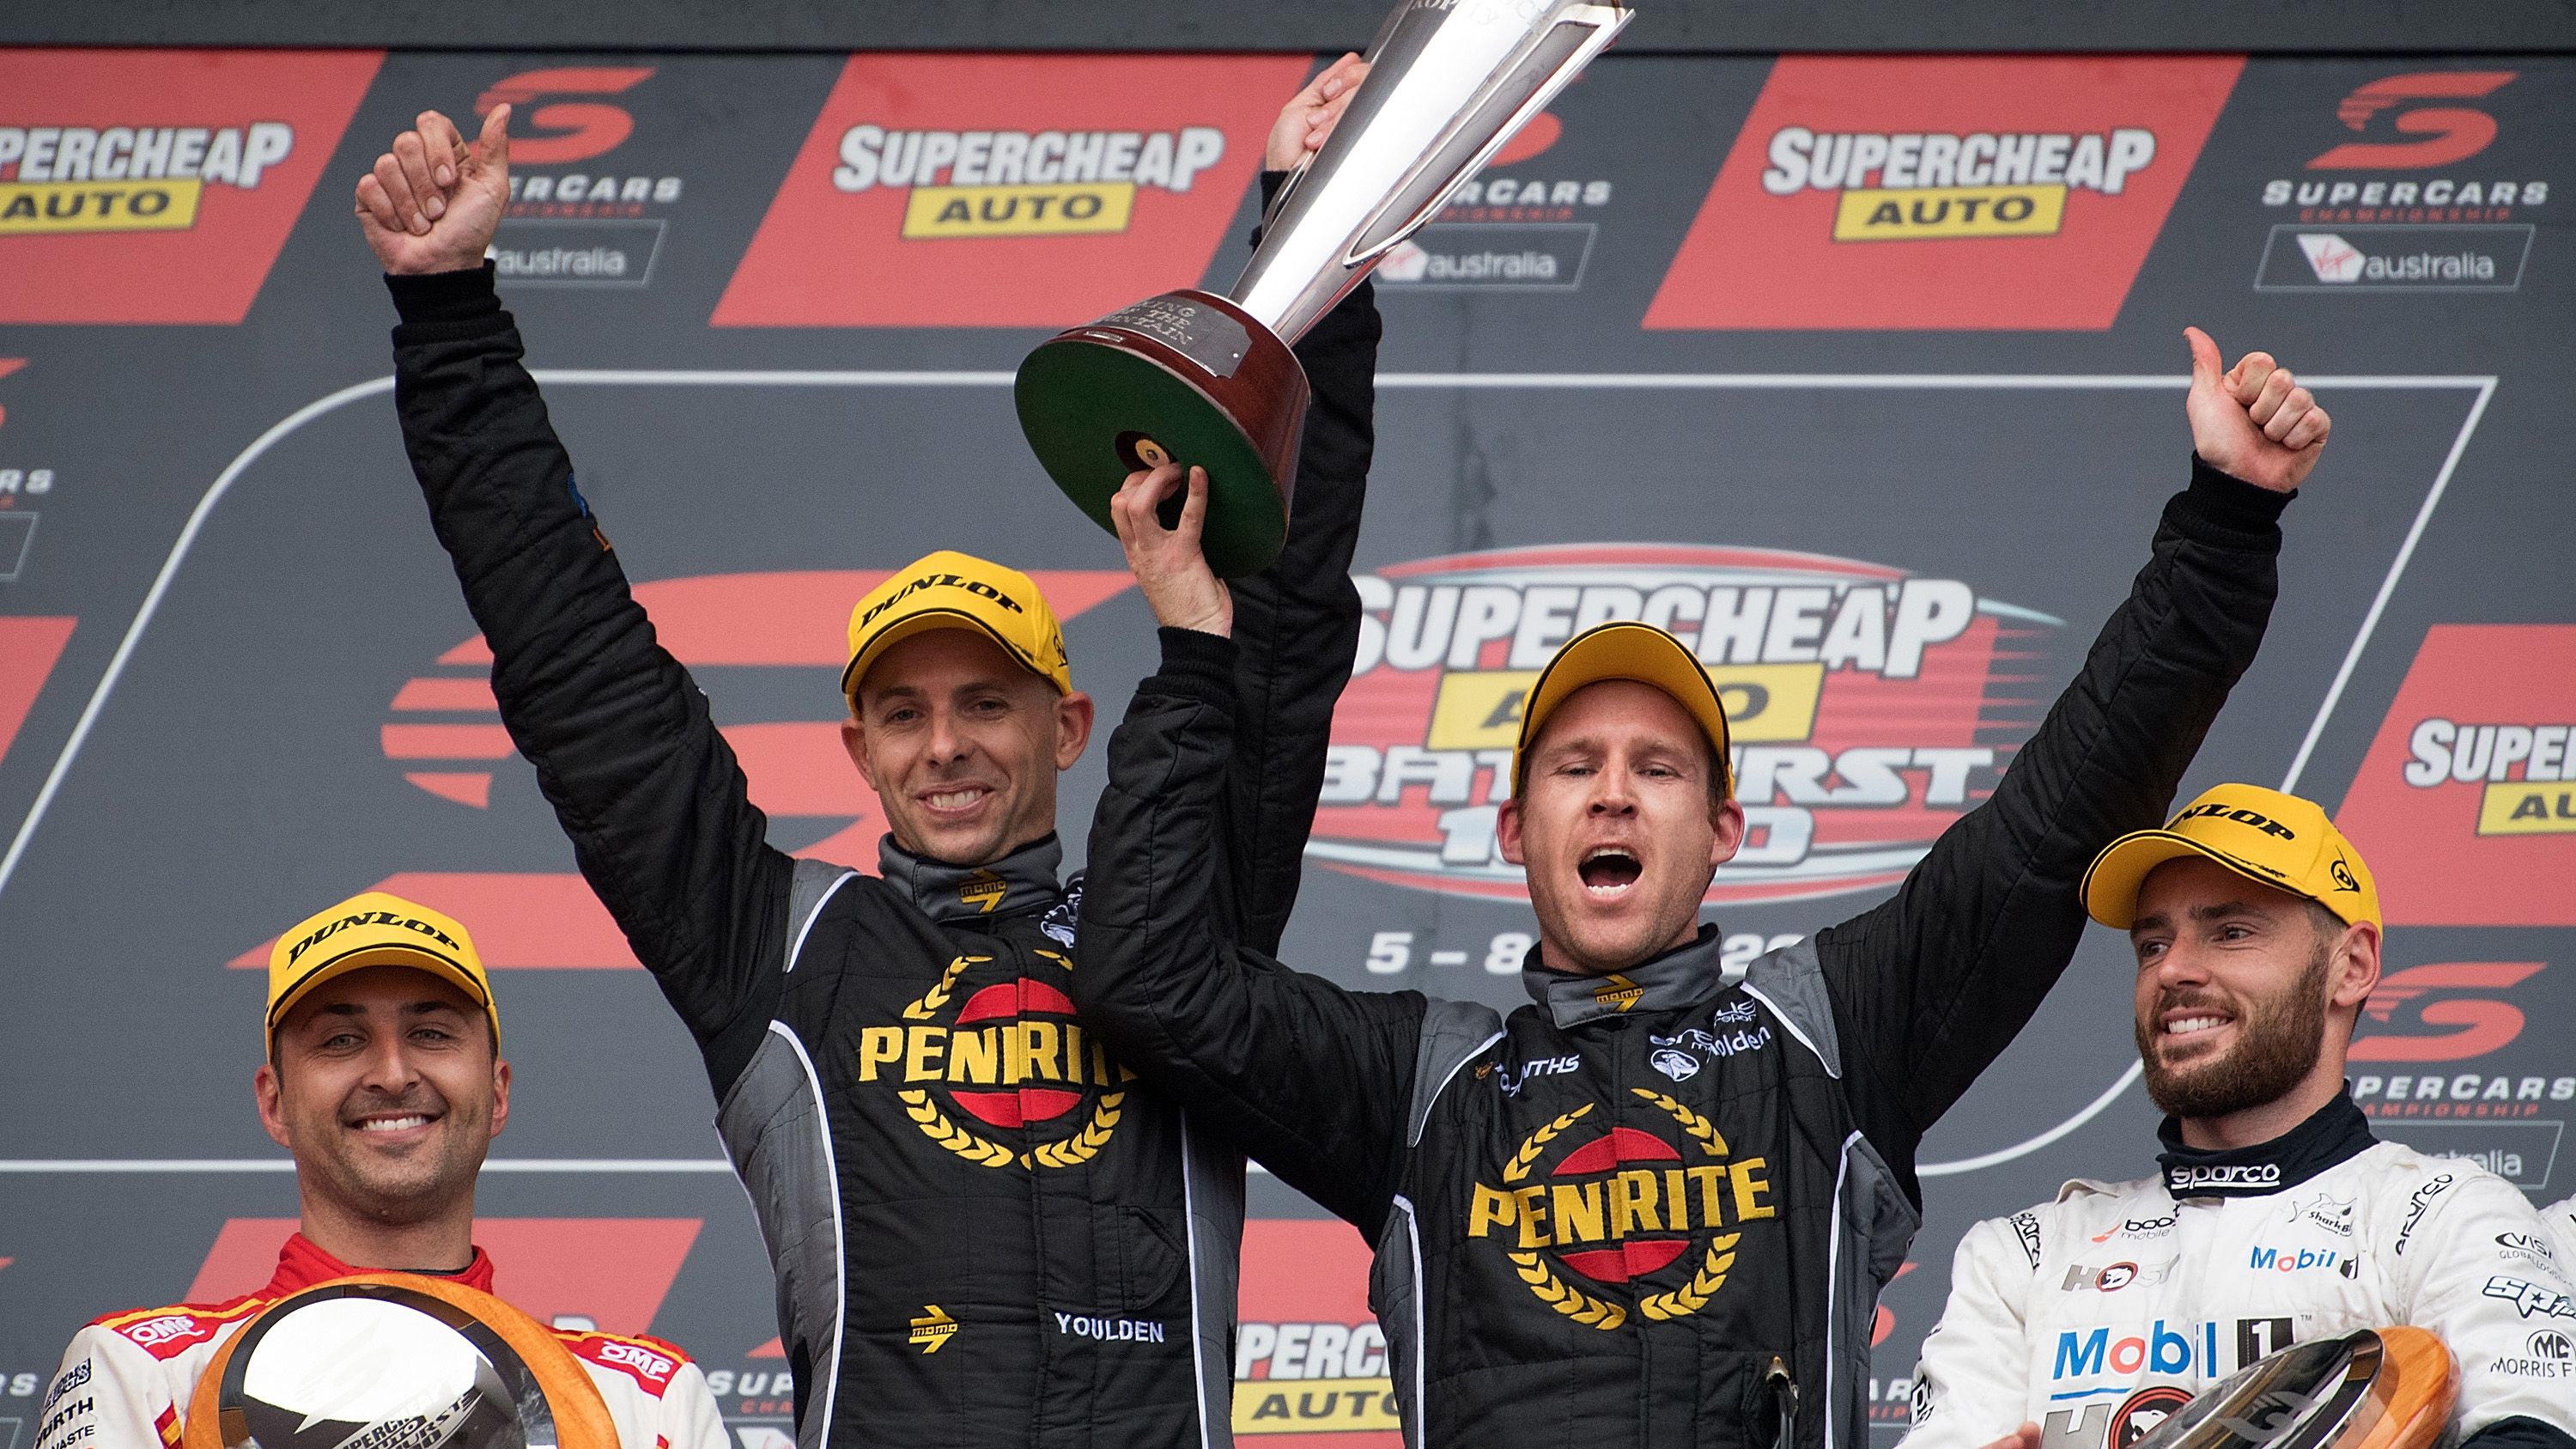 David Reynolds and Luke Youlden won the 2017 Bathurst 1000 in atrocious conditions.